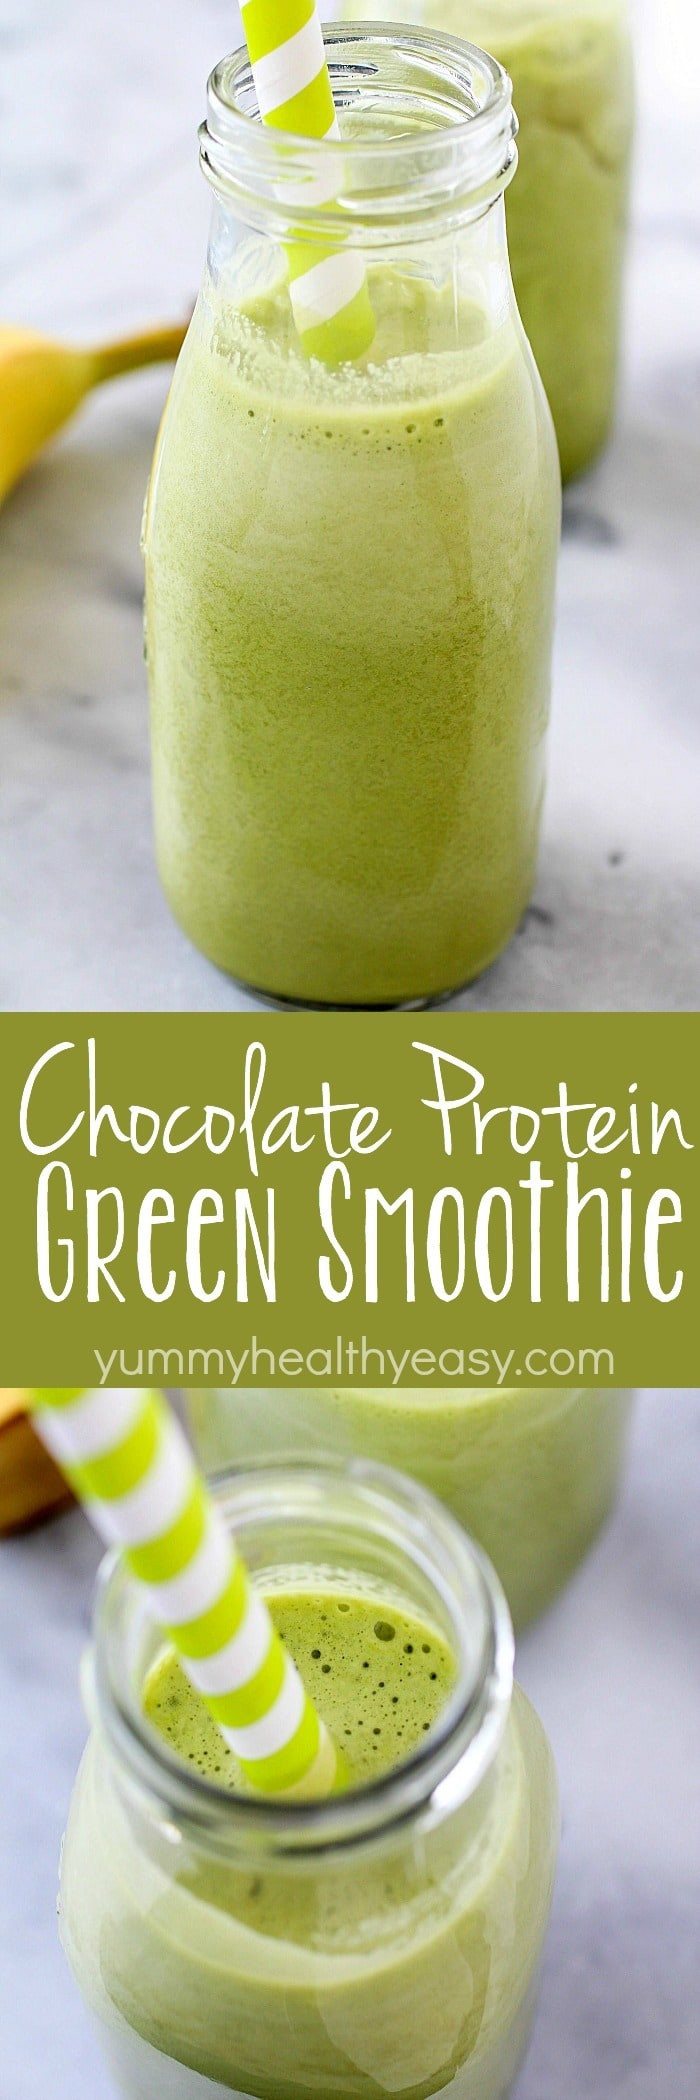 Protein Powder For Smoothies
 Chocolate Protein Green Smoothie Yummy Healthy Easy